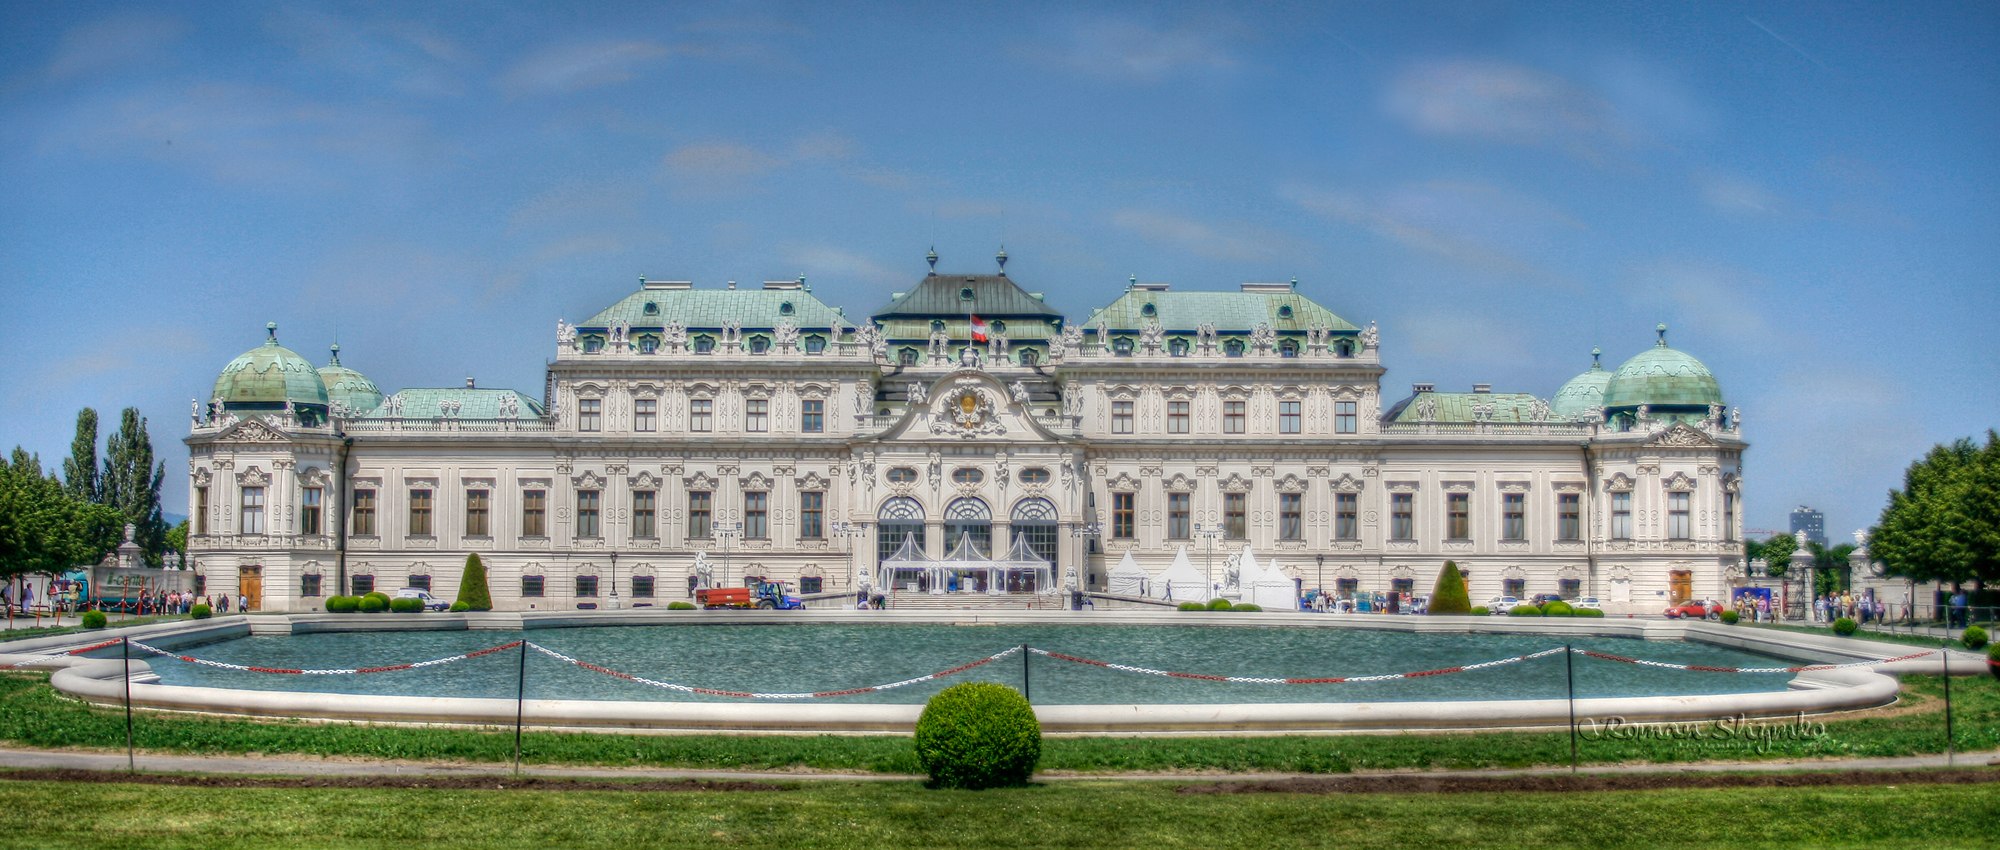 Belvedere Palace Architecture Best Wallpaper 